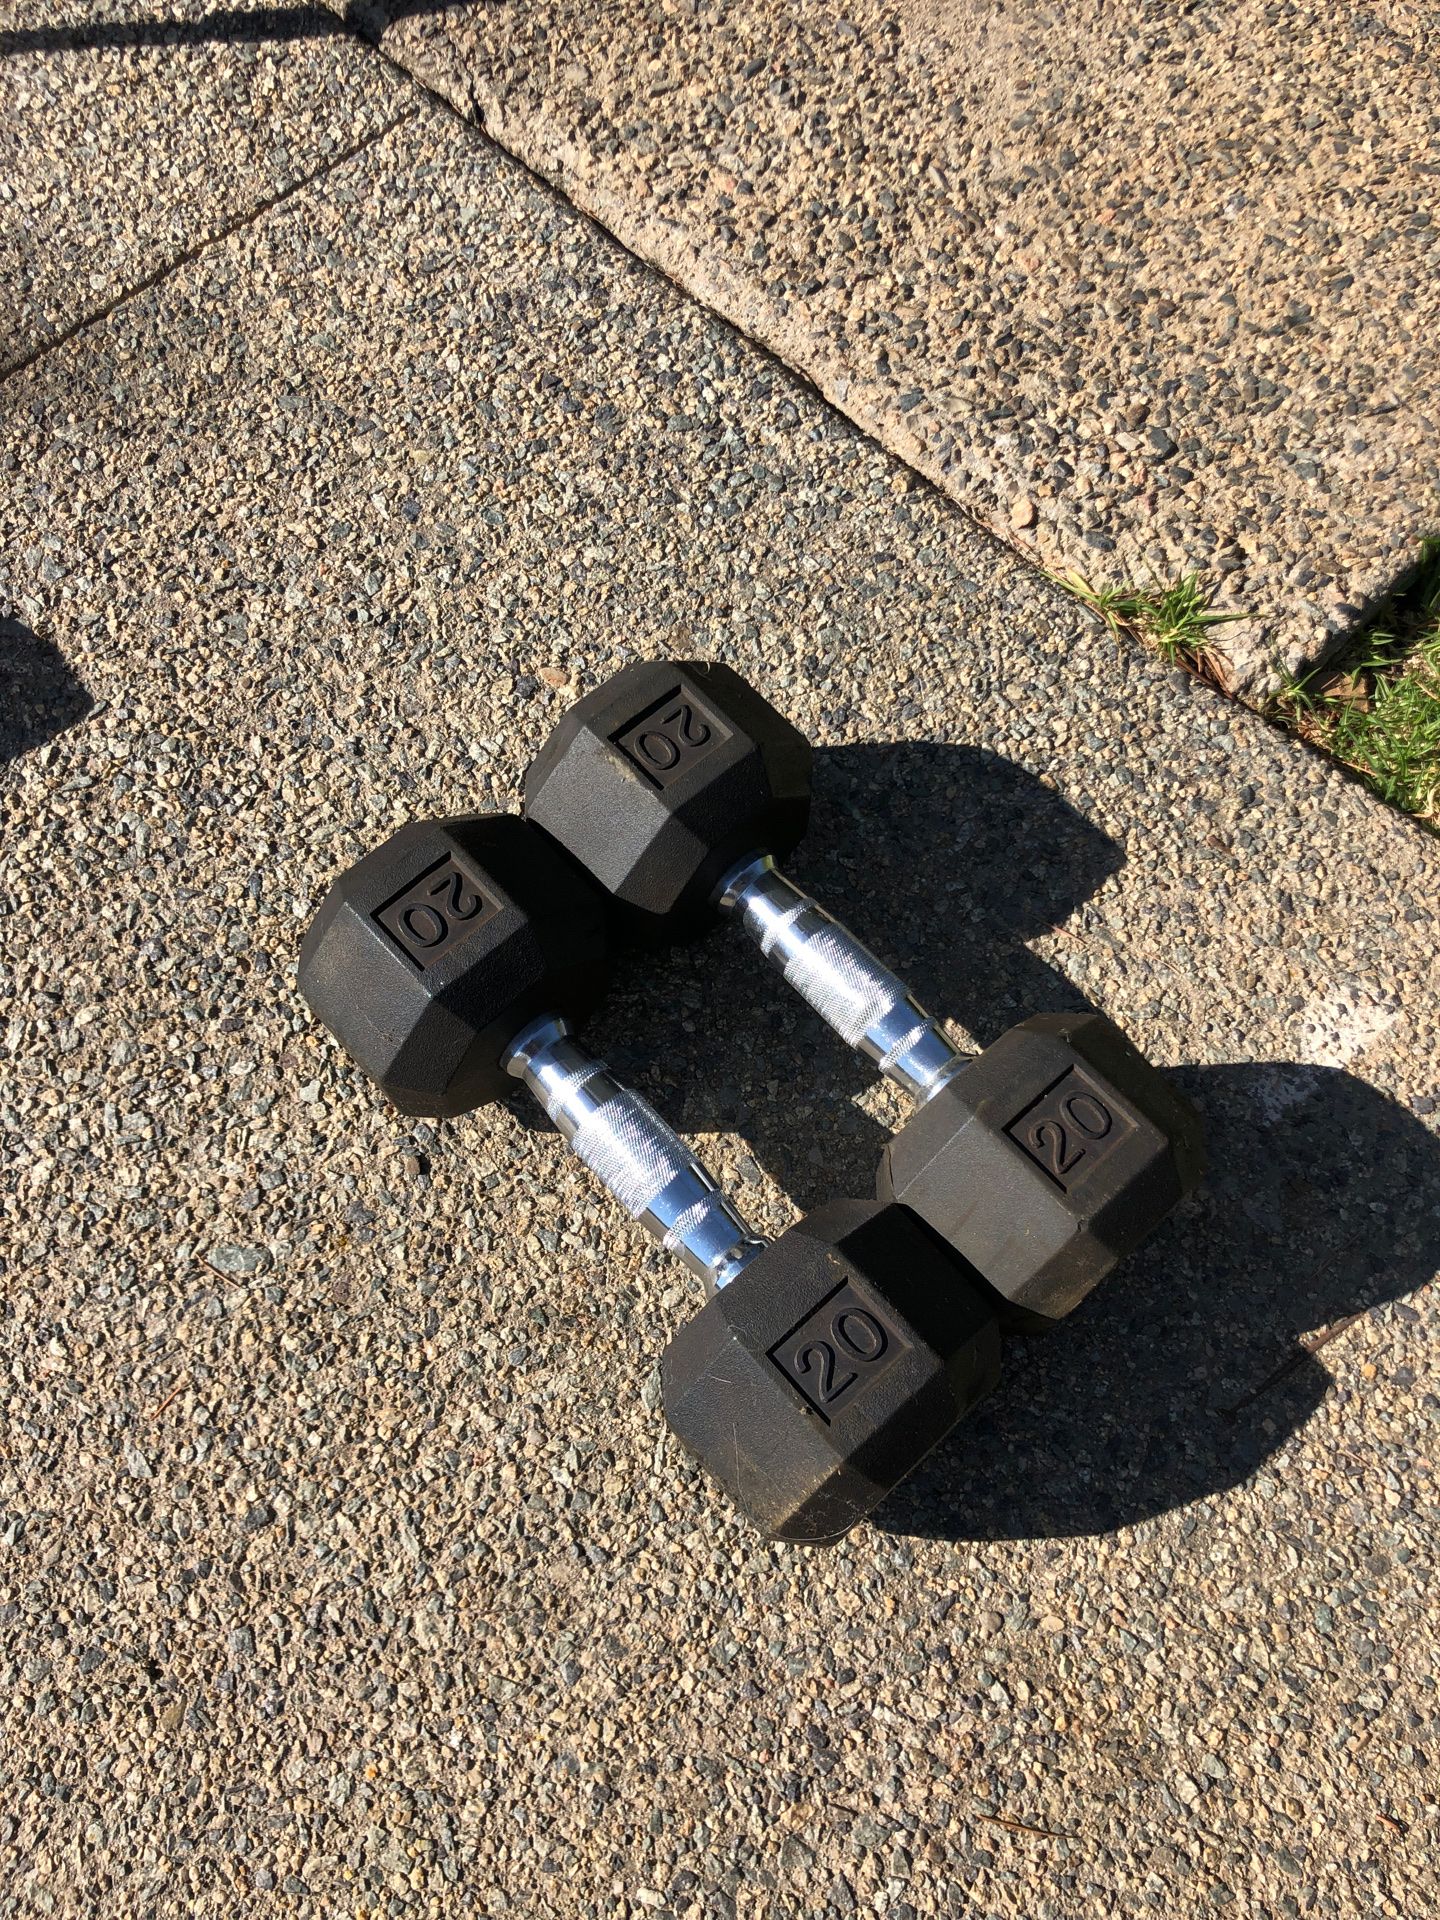 20 lb set of hand weights